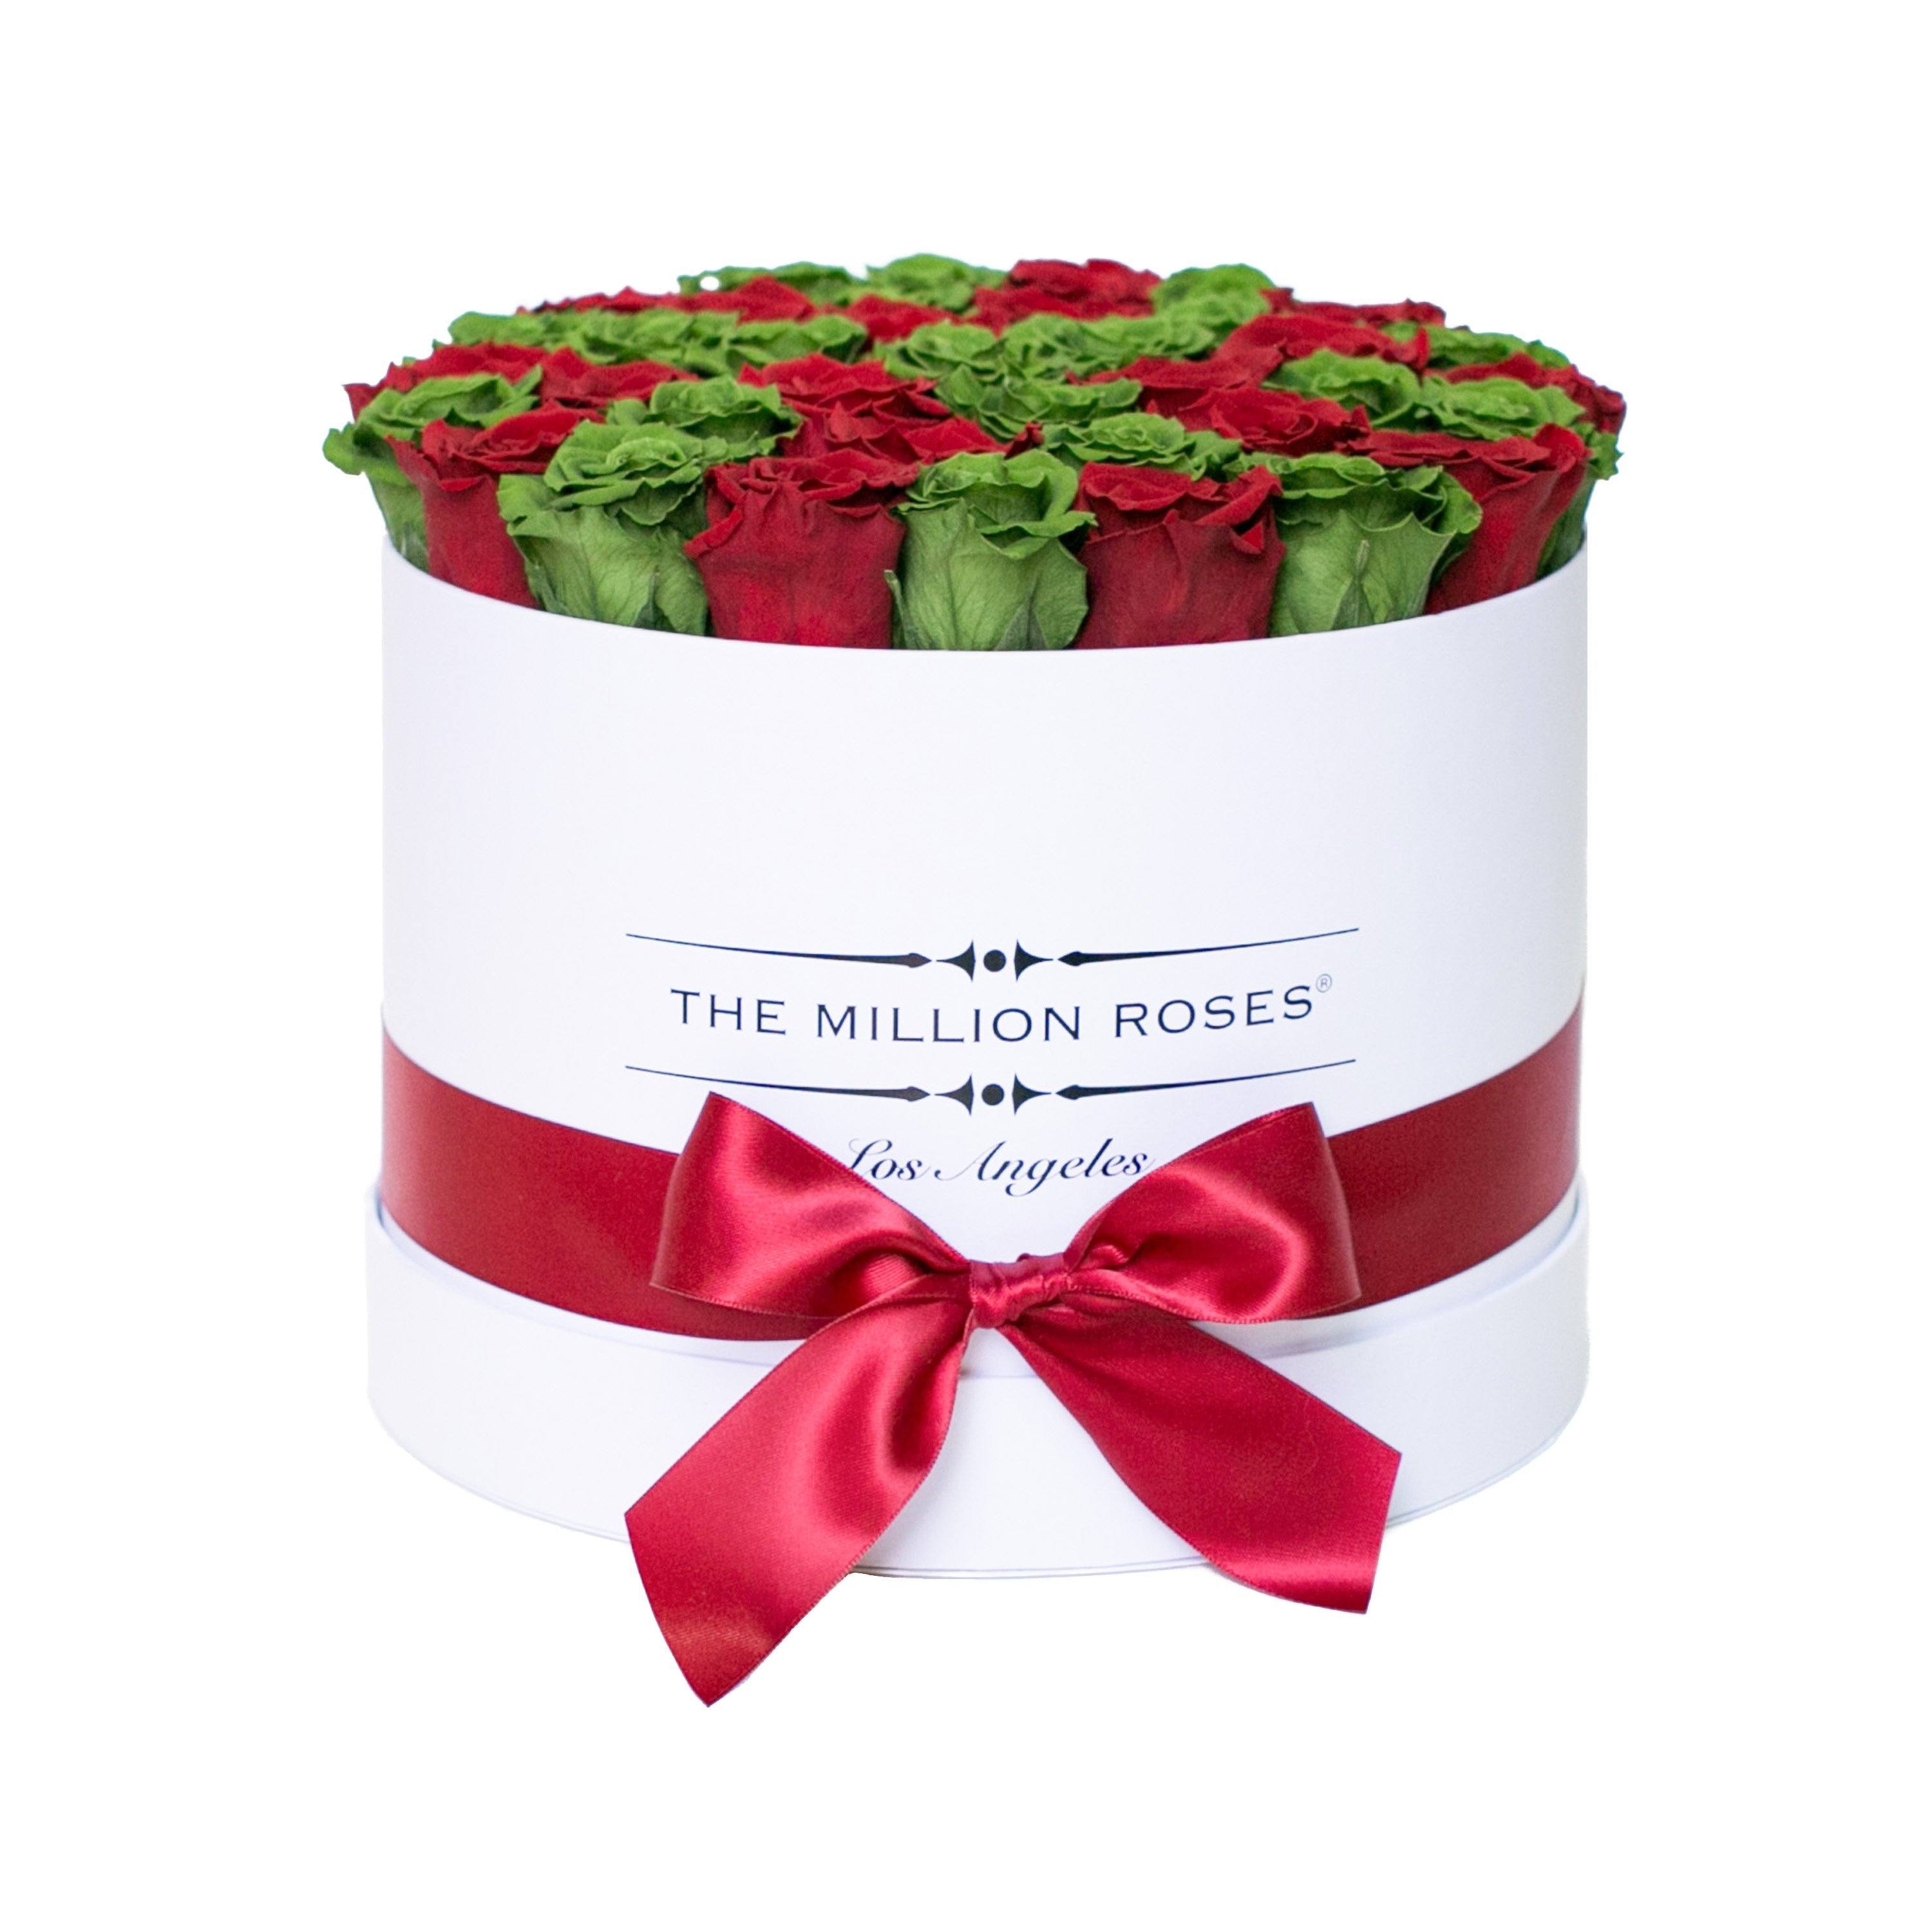 medium round box - white - emerald-green&red roses red eternity roses - the million roses